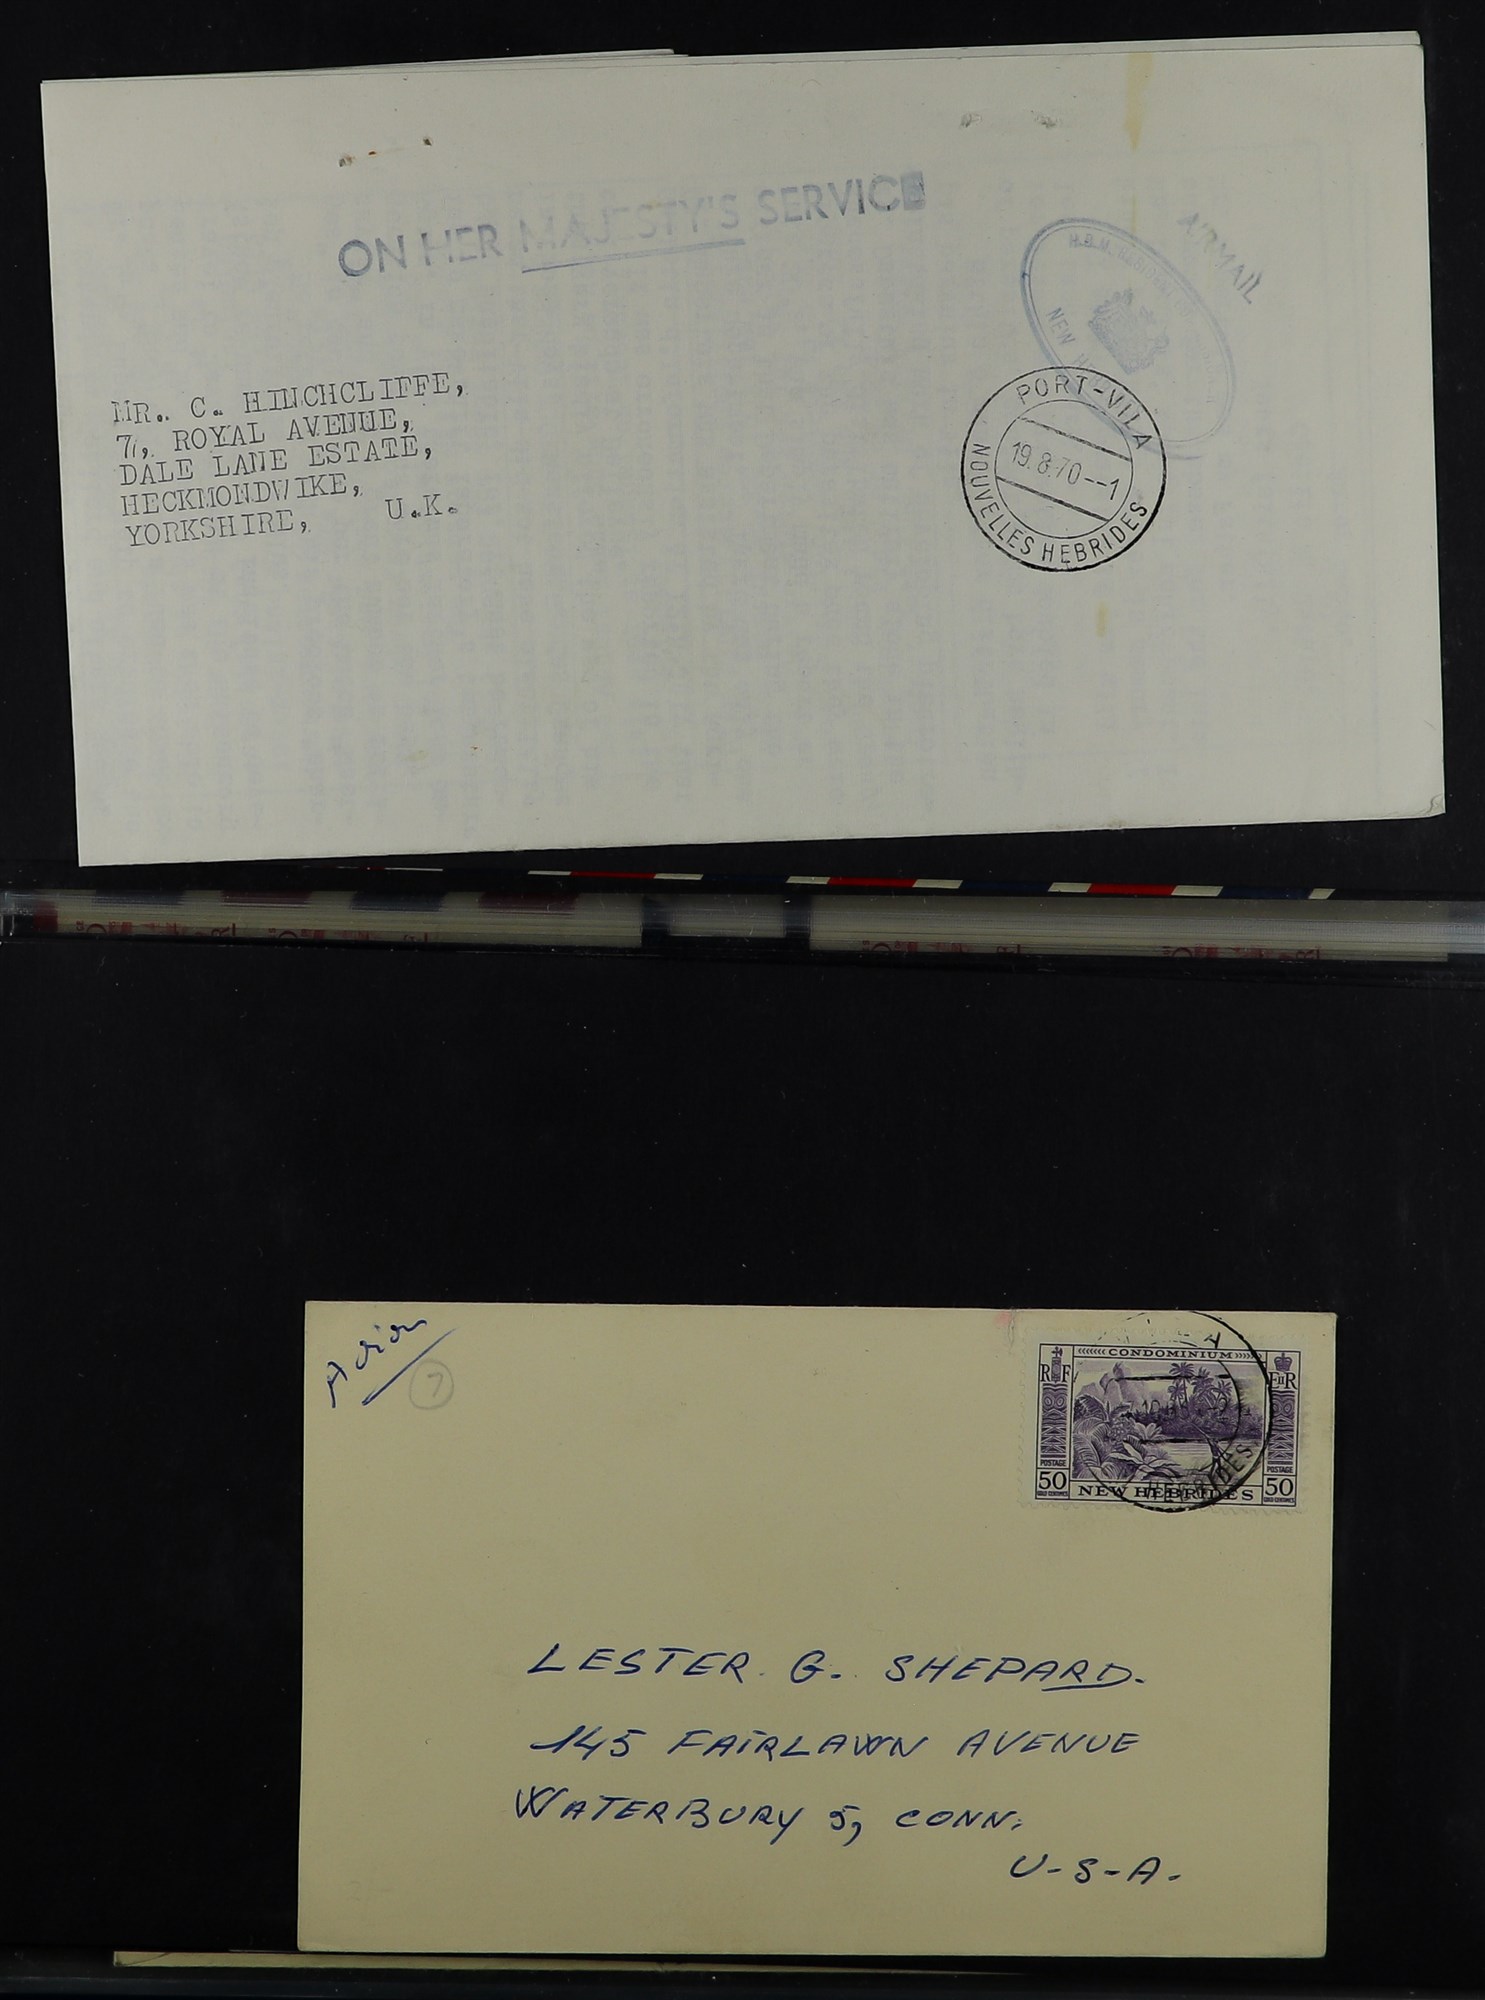 NEW HEBRIDES ENGLISH 1953-69 covers collection, with commercial & philatelic covers, registered - Image 9 of 15